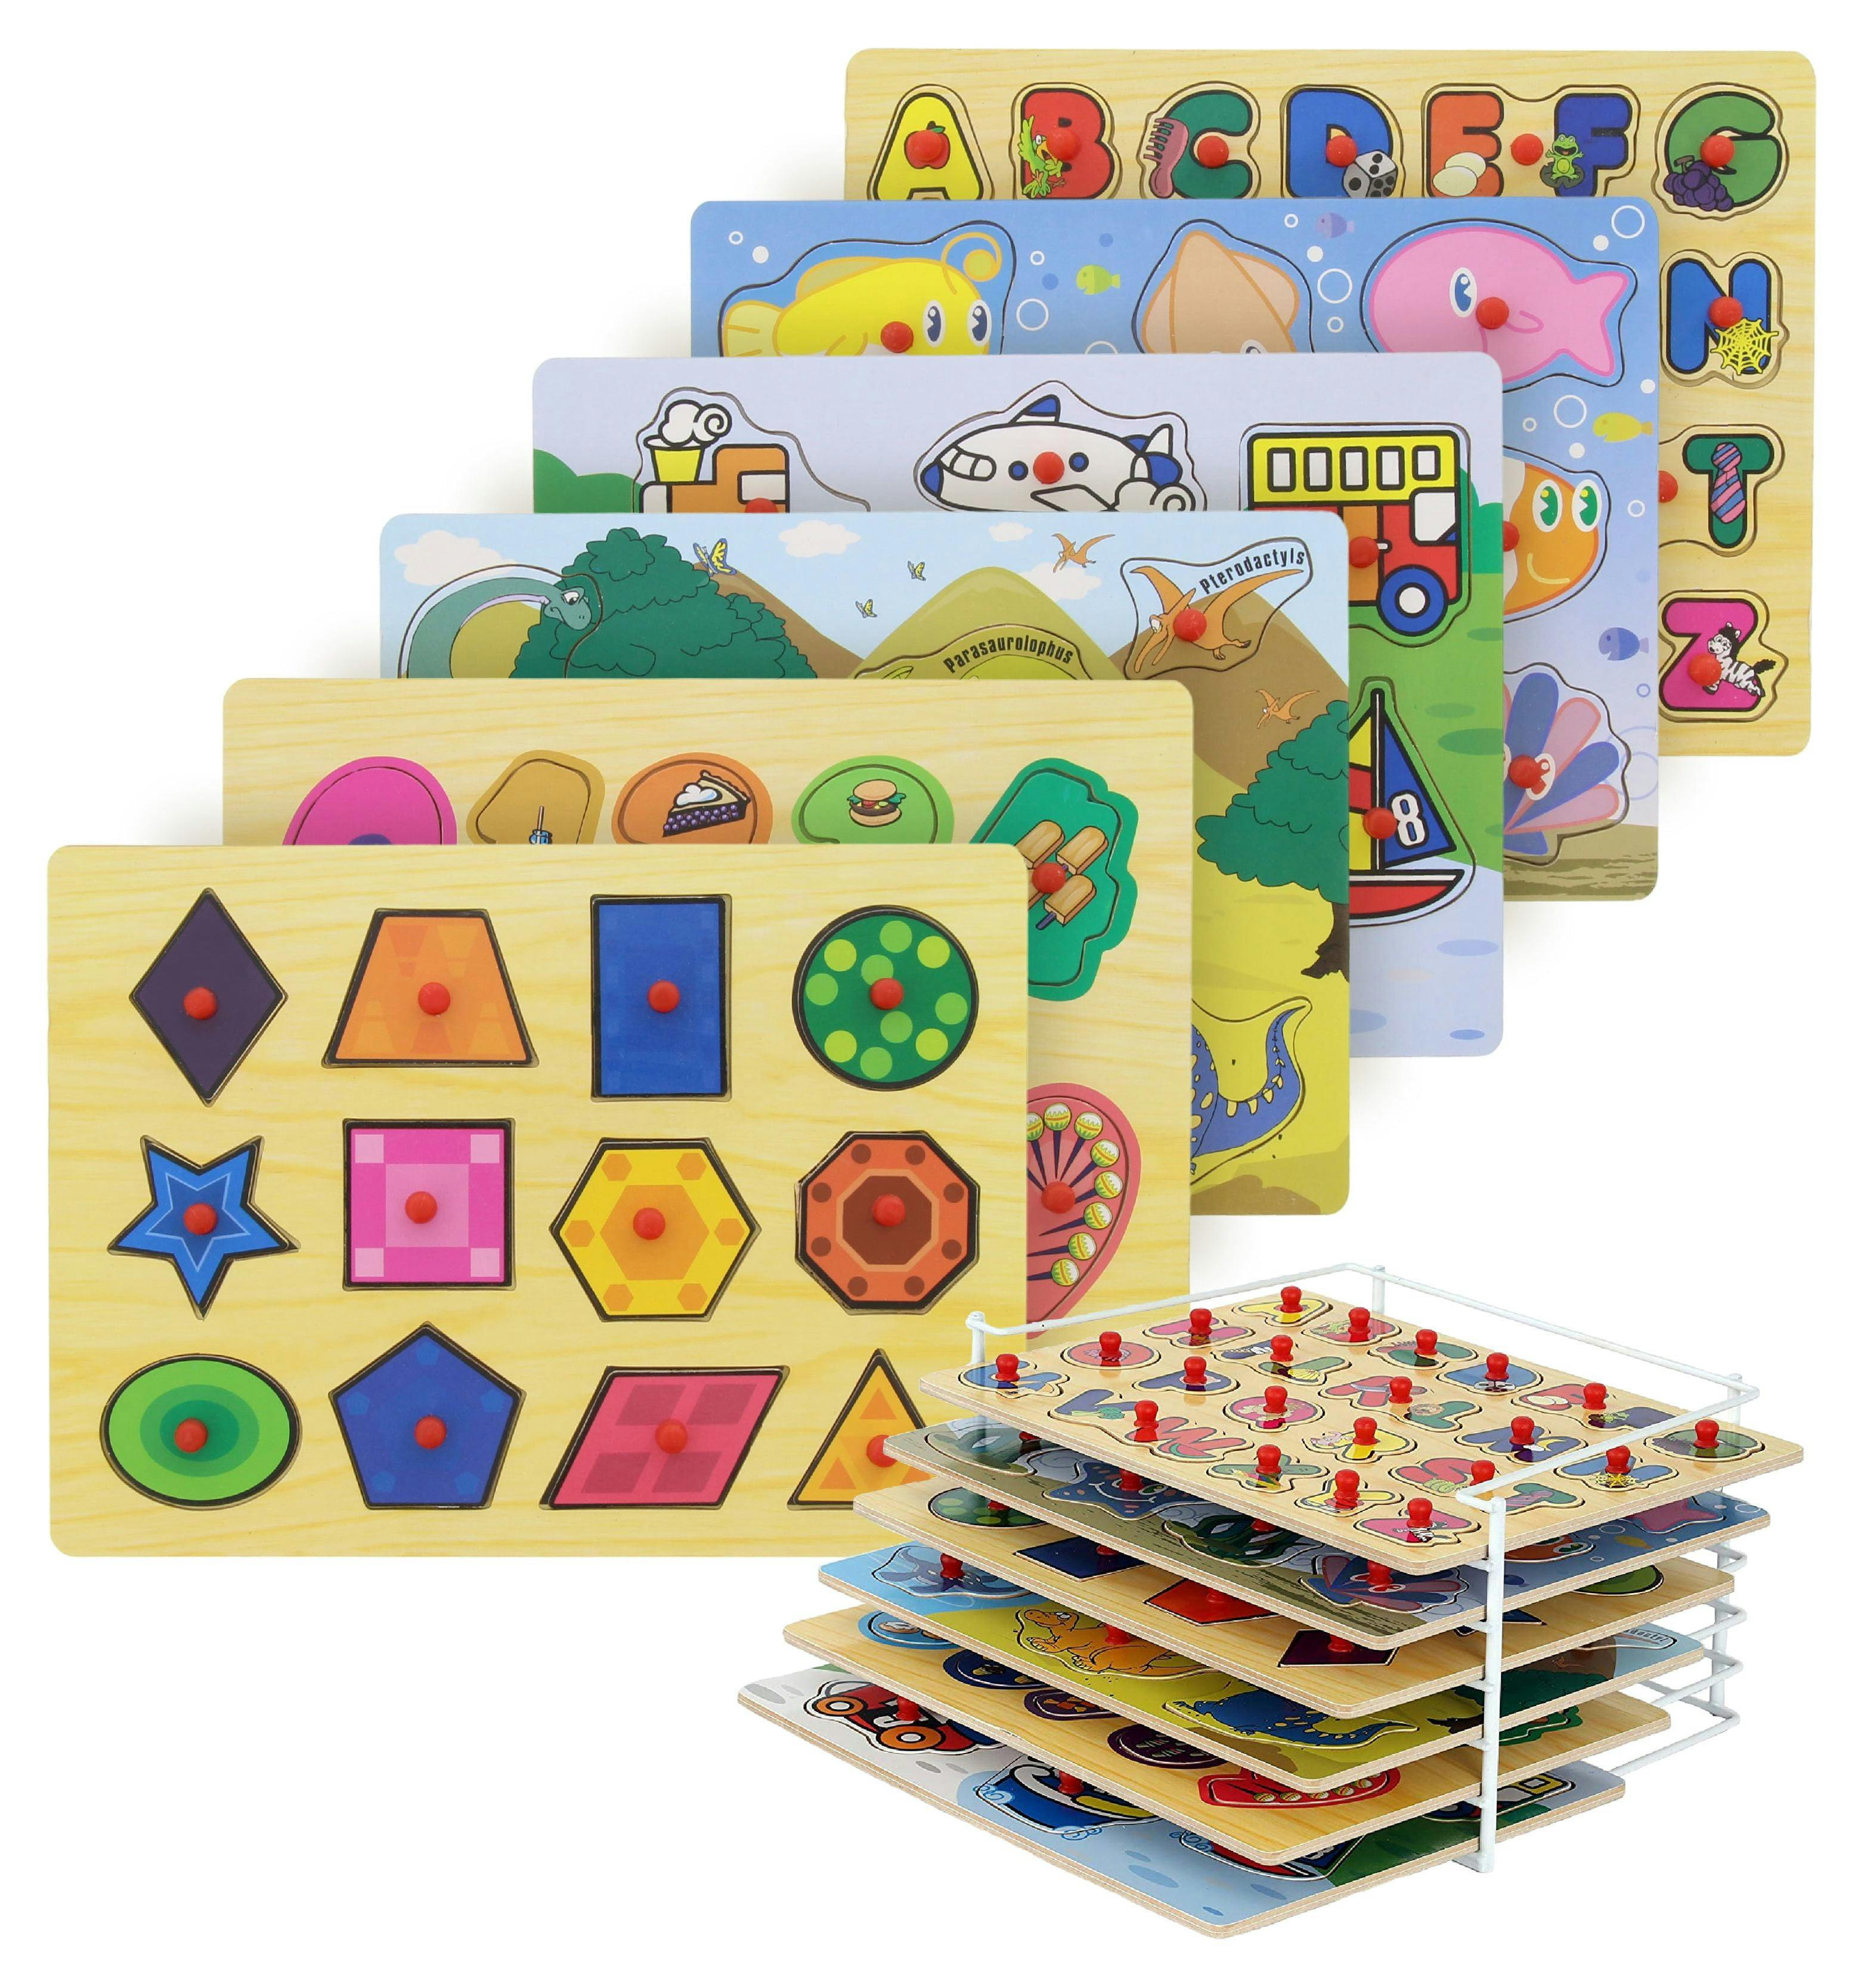 Bright Animal & Geometric Shapes Wooden Puzzle Set for Kids